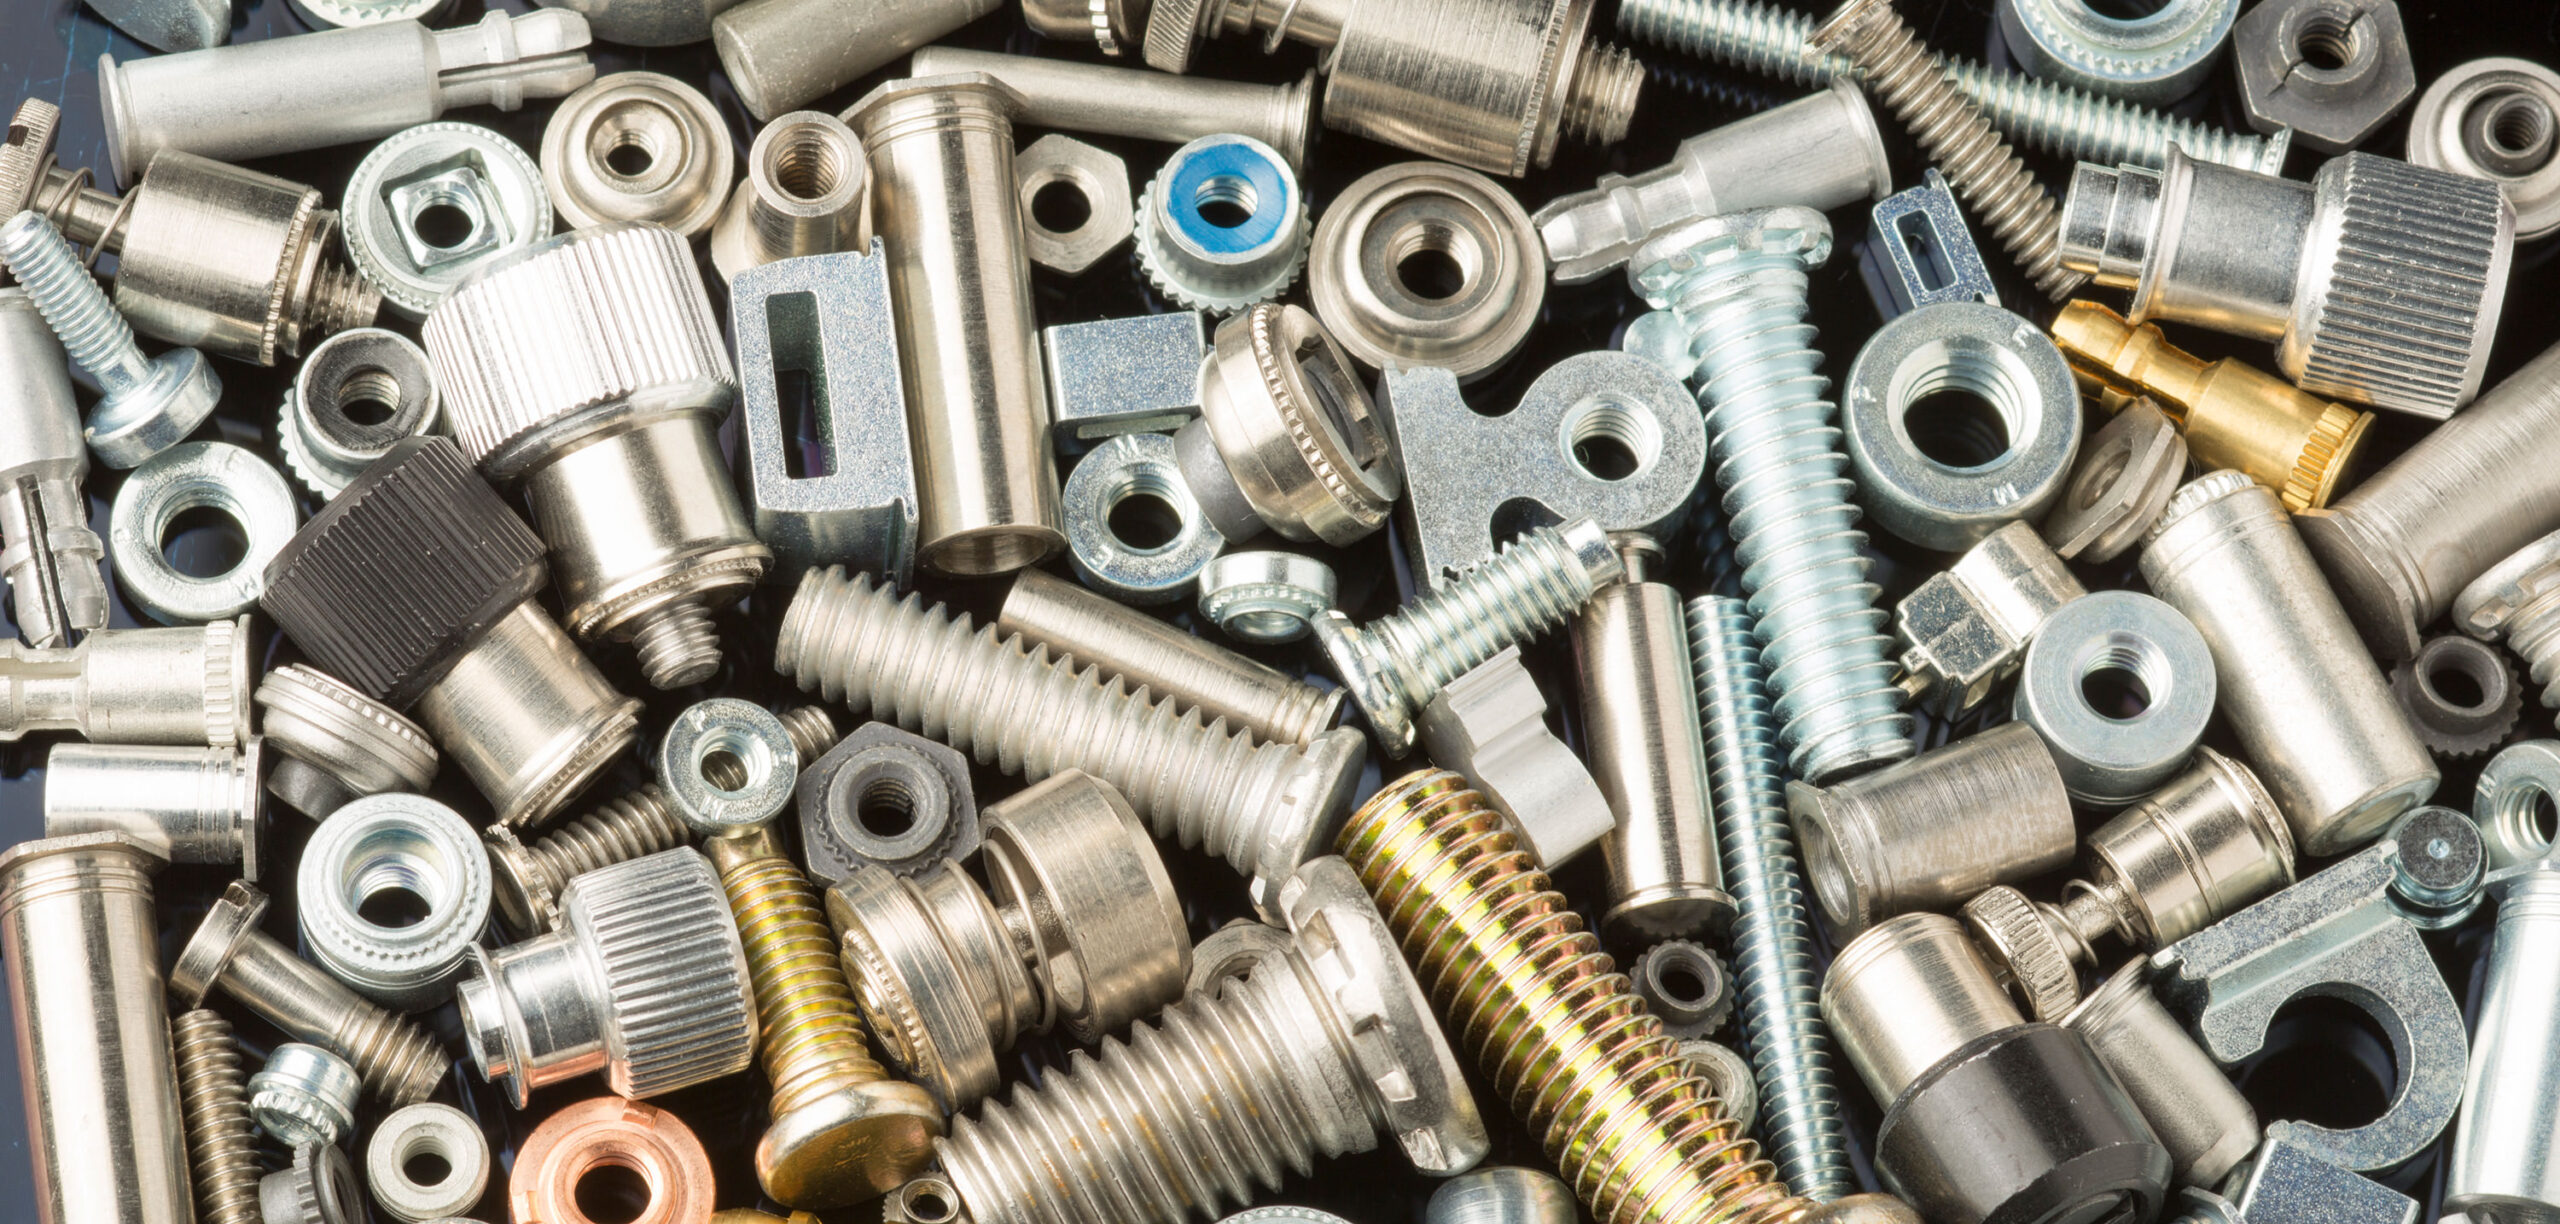 The Nuts and Bolts Fastening System - Screws and Fasteners